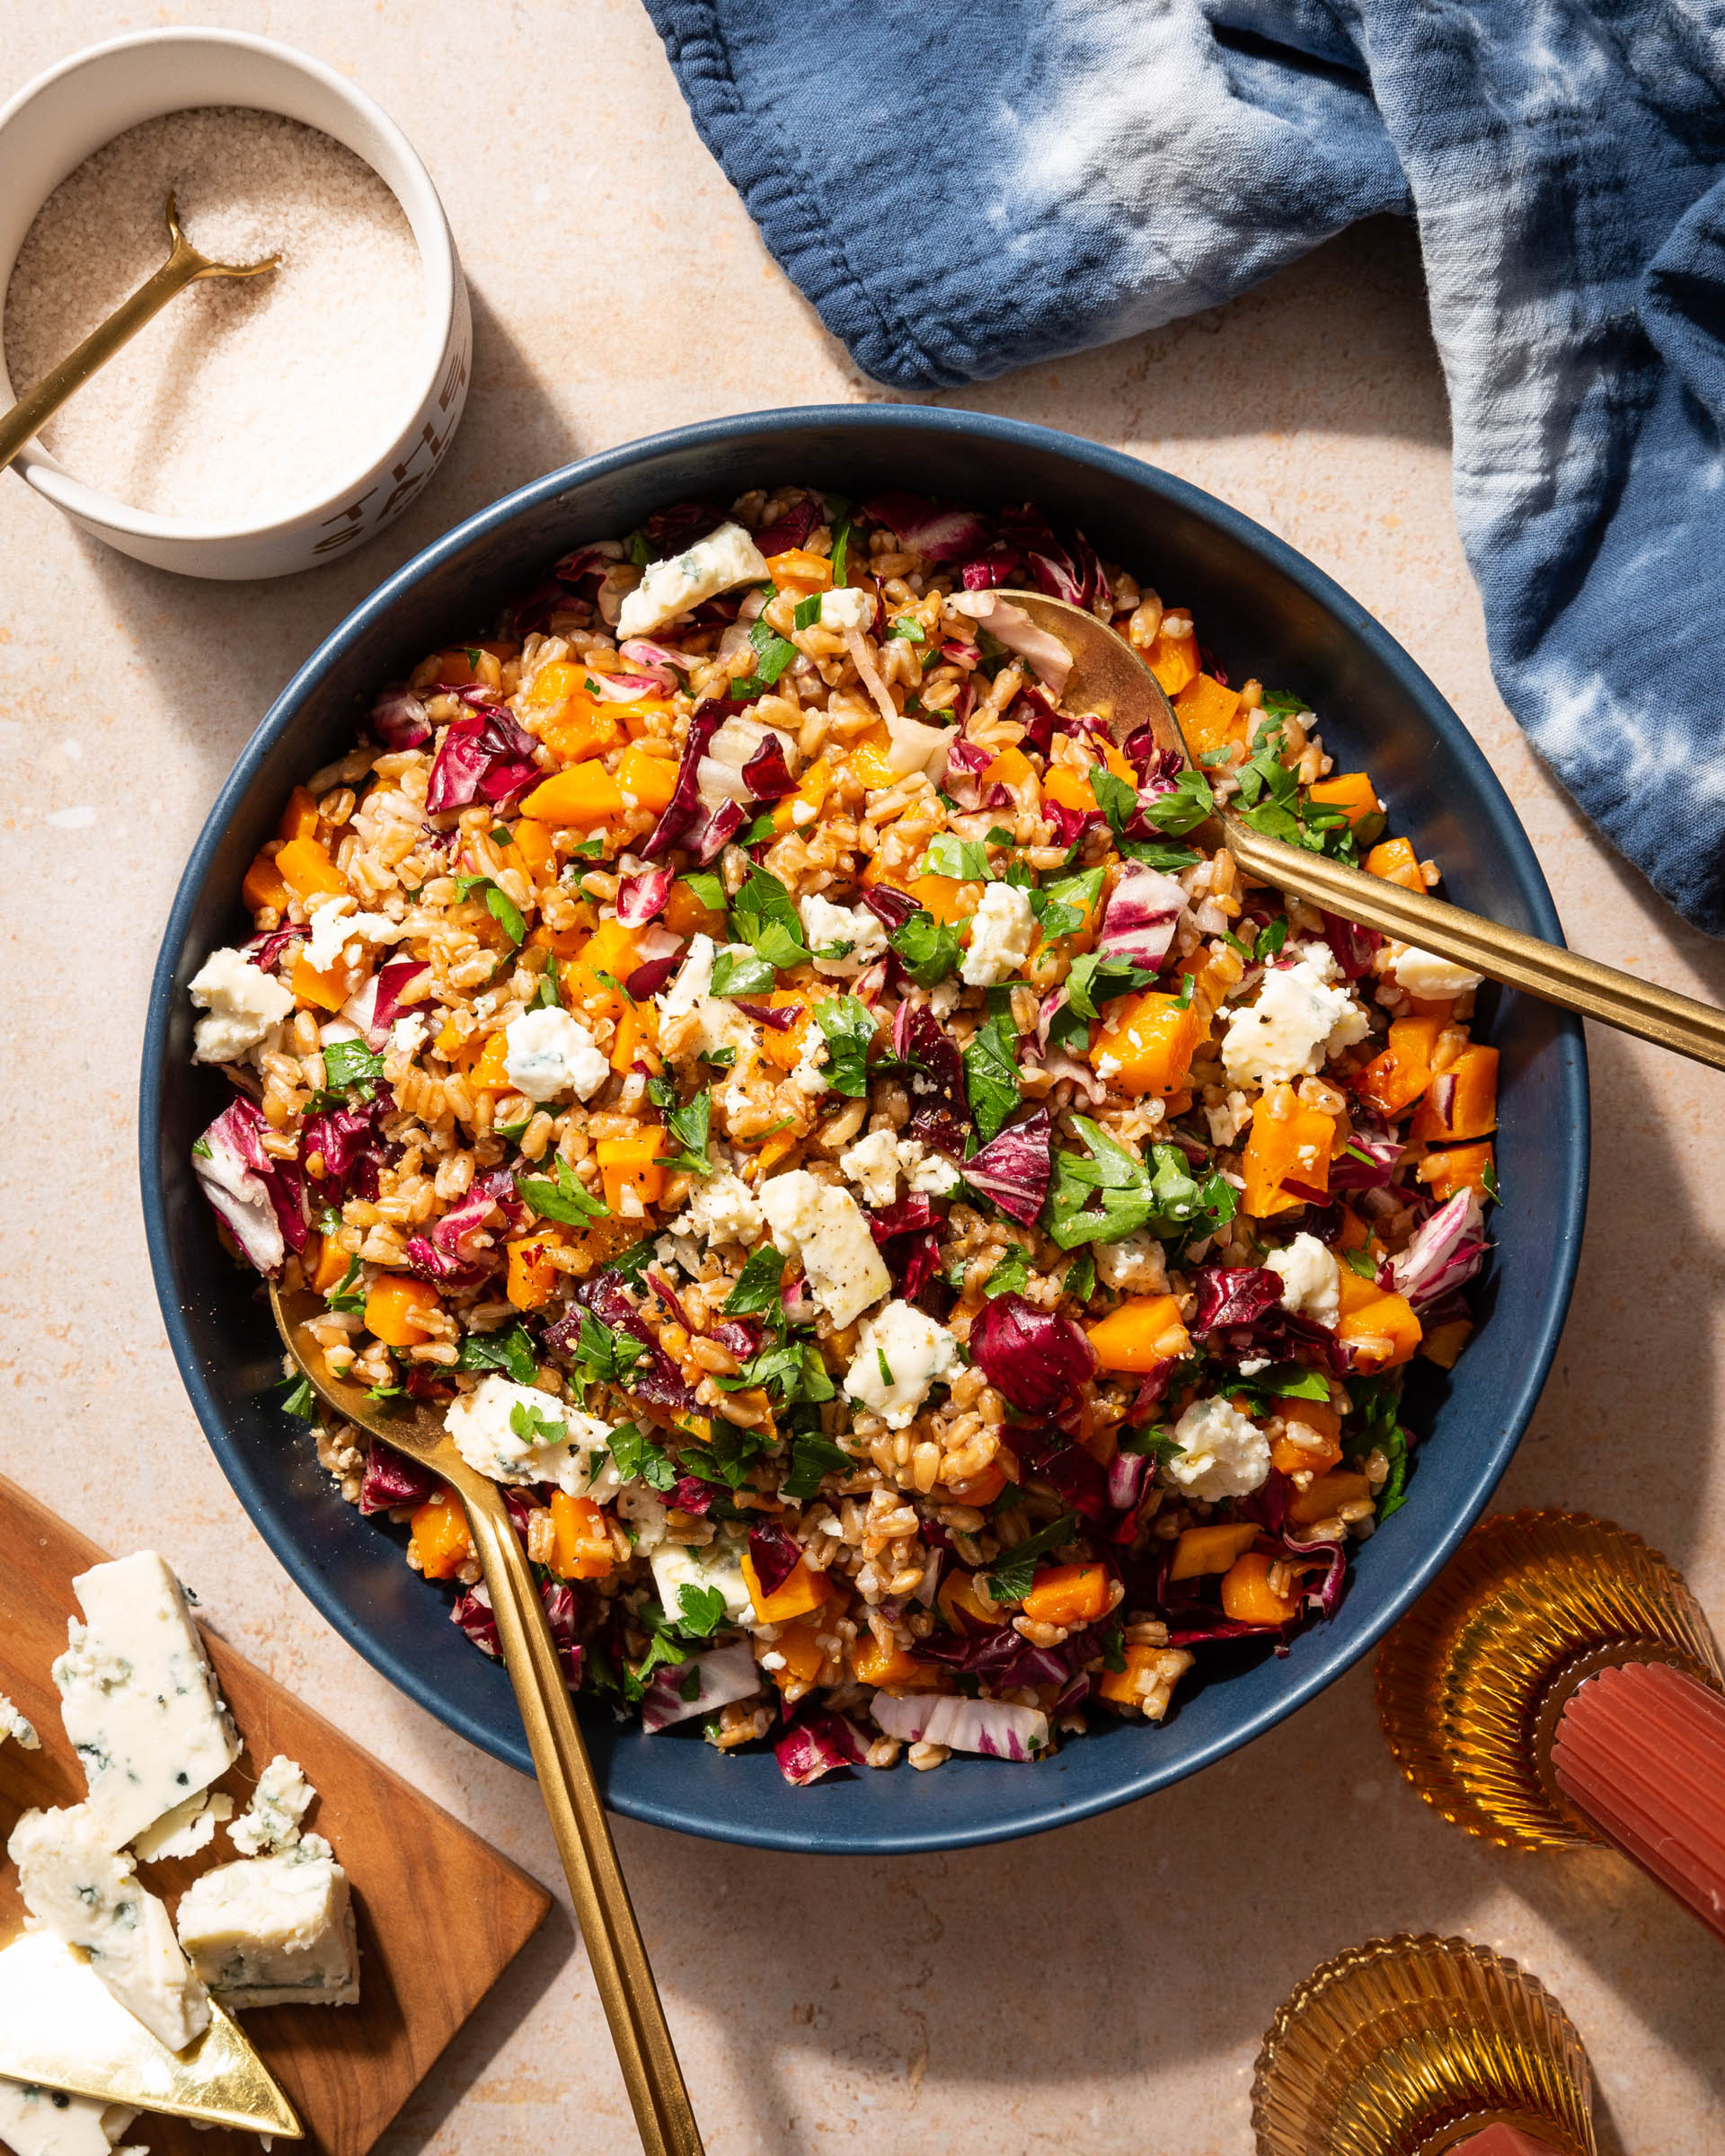 Farro Salad with Butternut Squash, Radicchio, and Blue Cheese